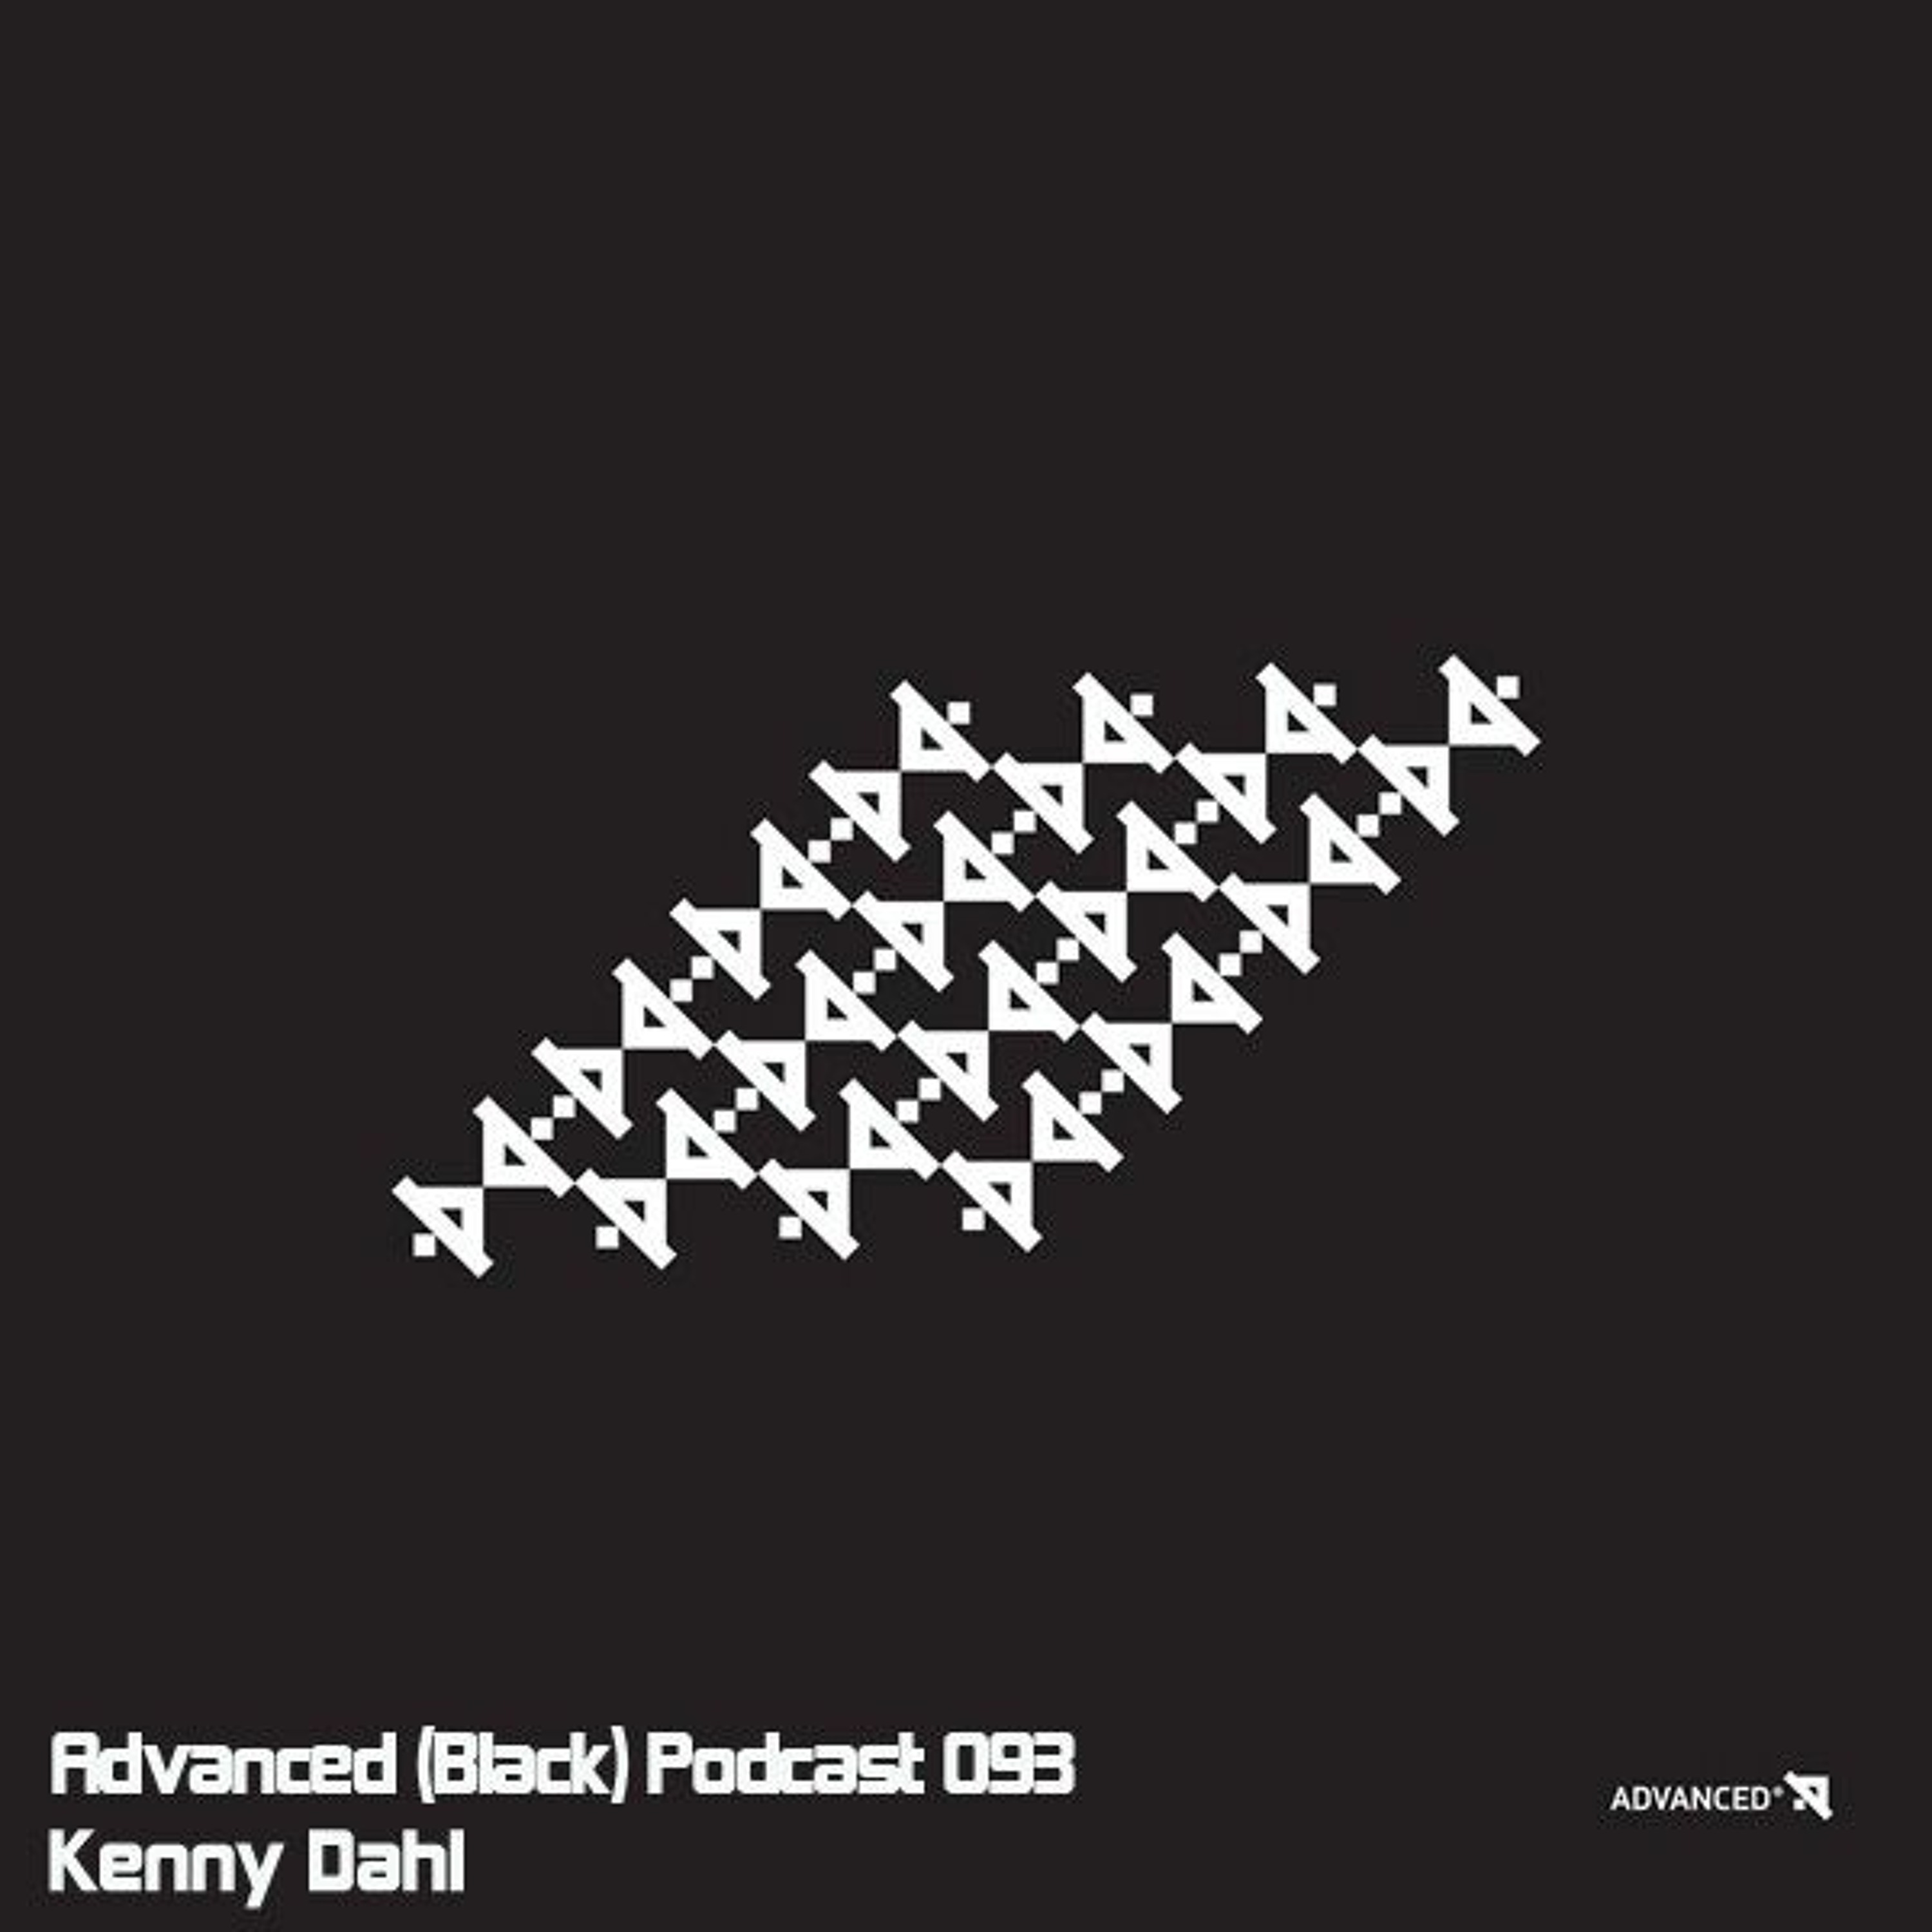 Advanced (Black) Podcast 093 with Kenny Dahl